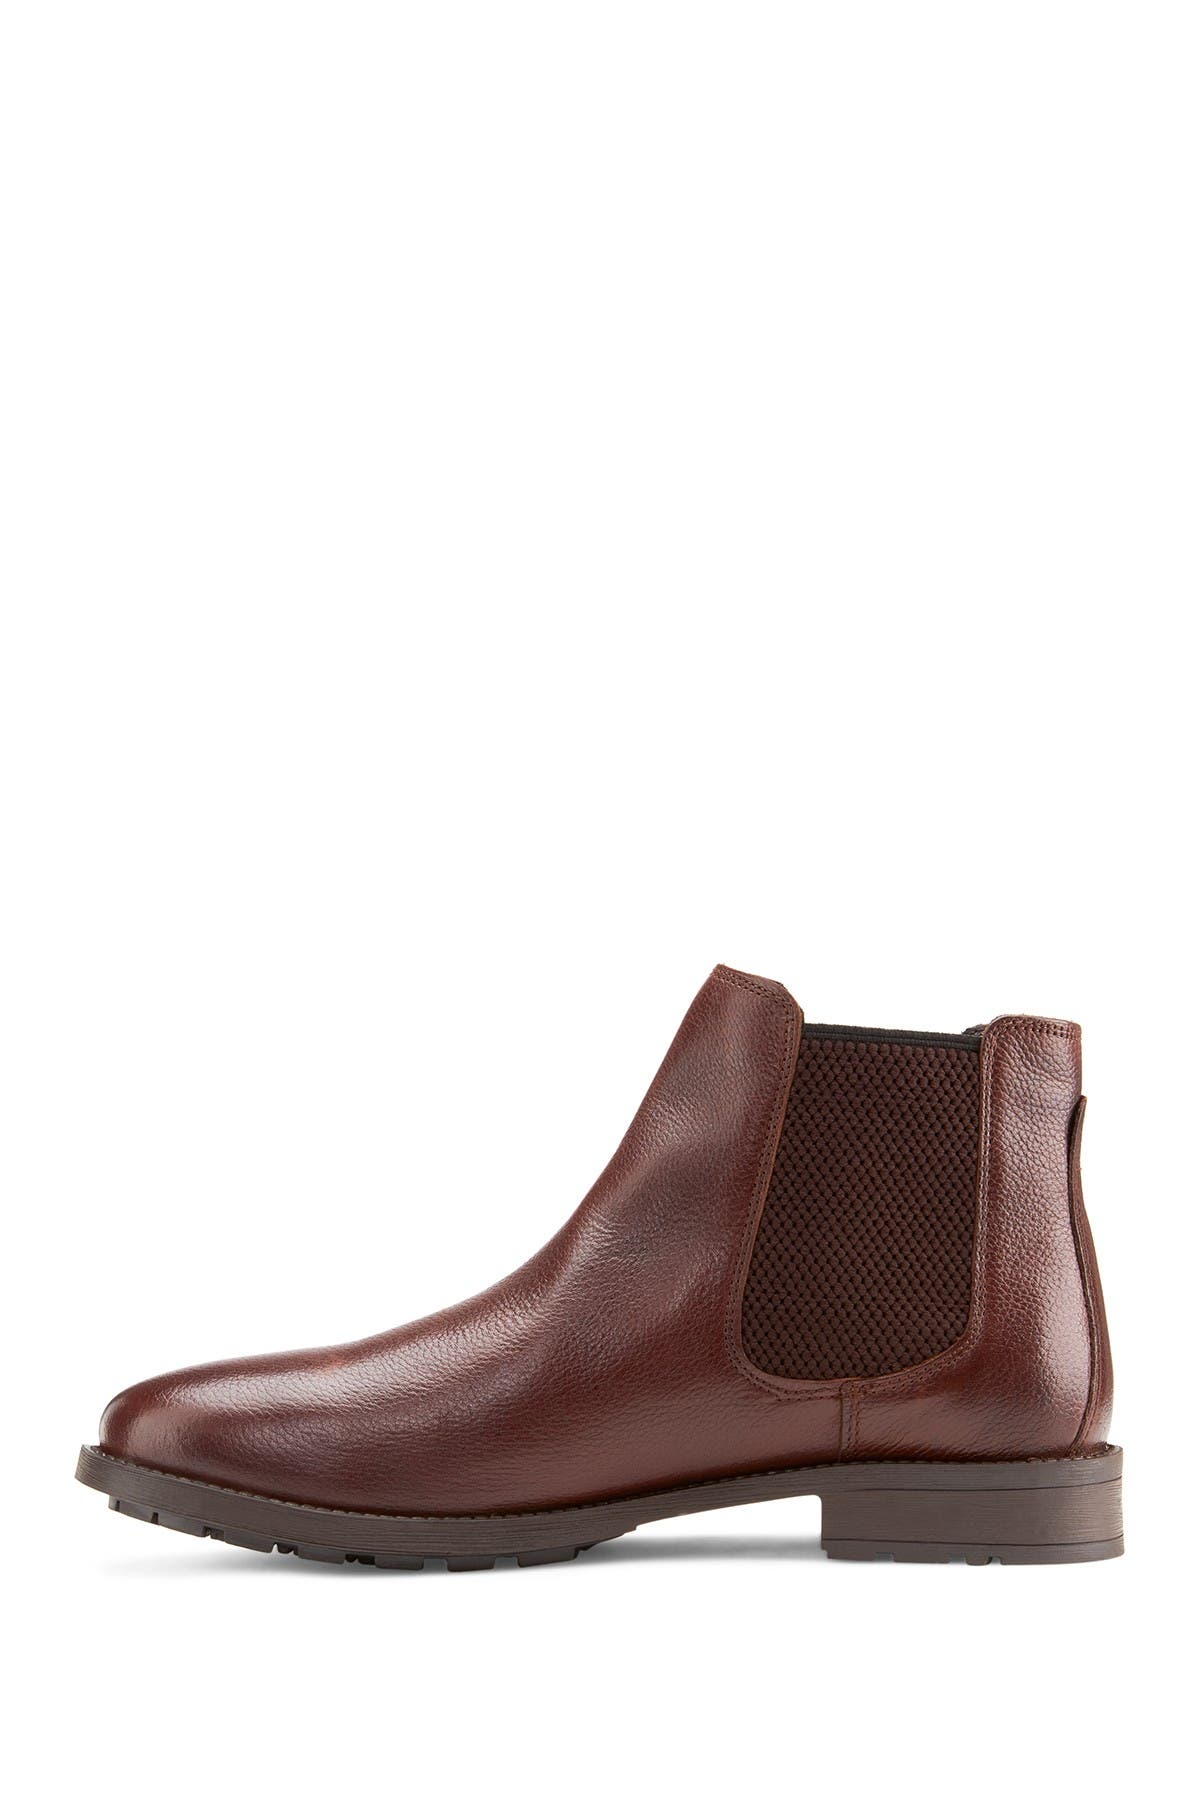 Reserved Footwear | Leather Chelsea 